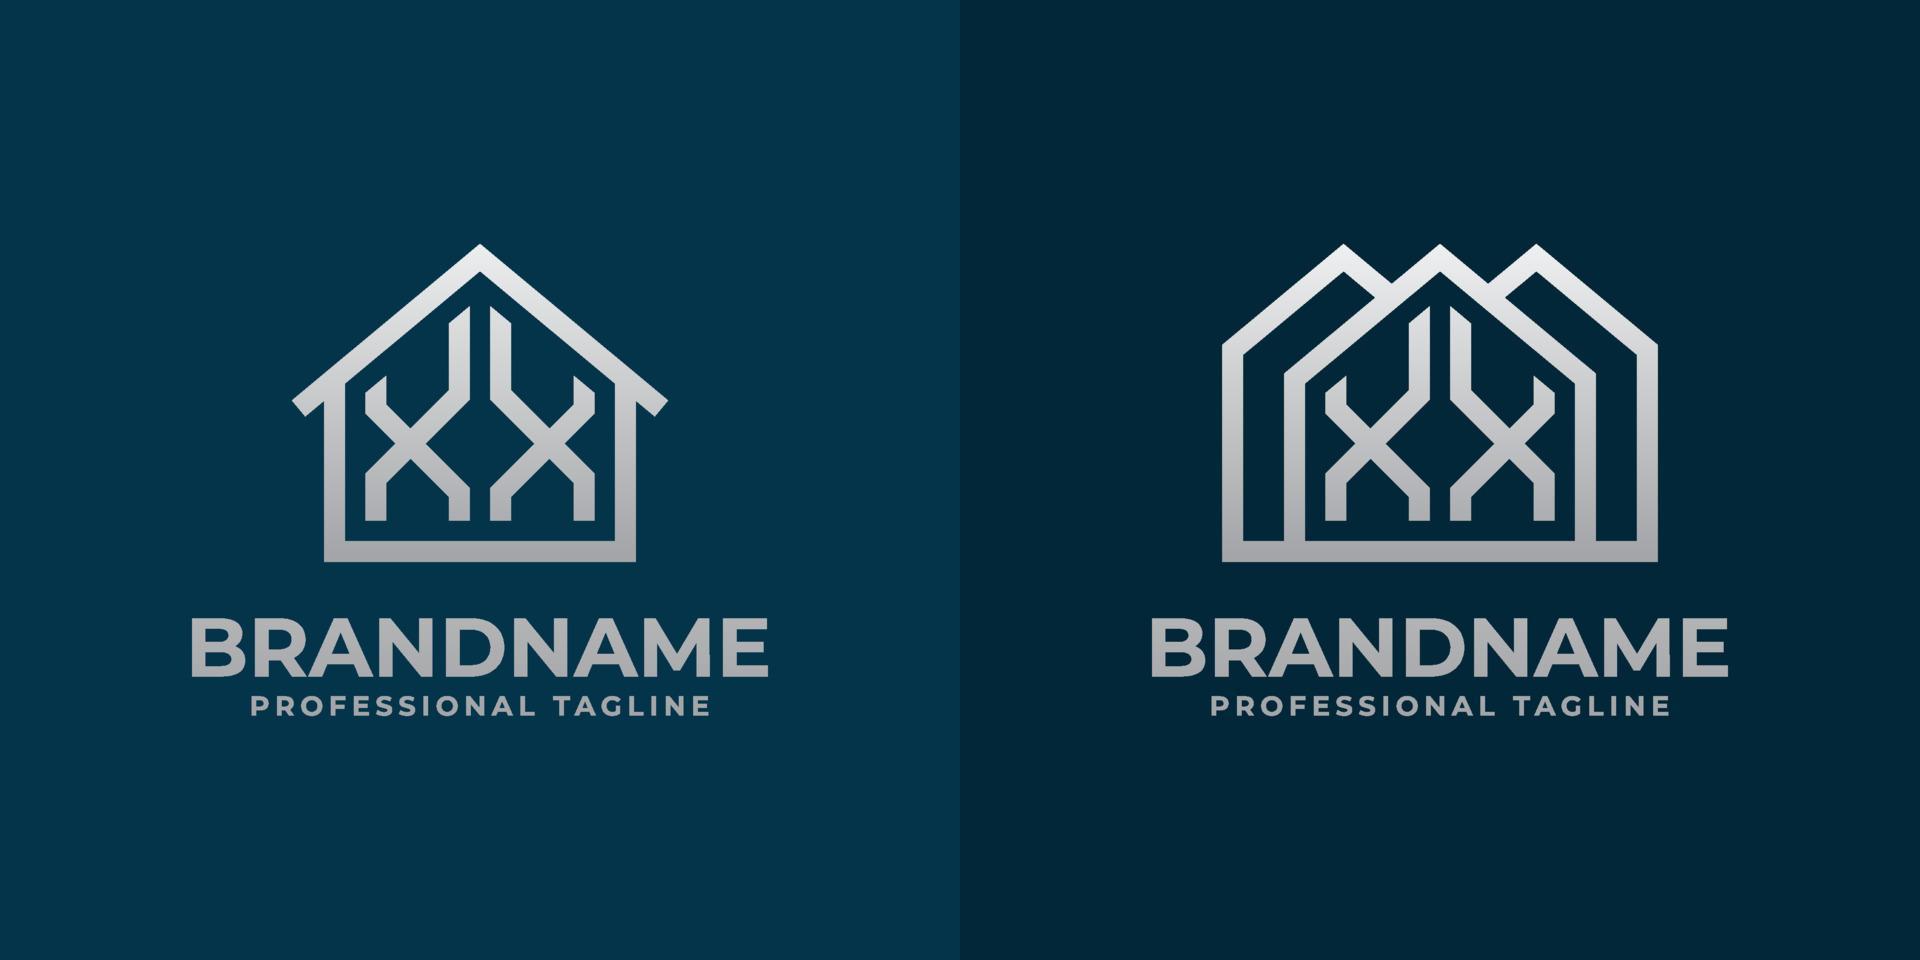 Letter XX Home Logo Set. Suitable for any business related to house, real estate, construction, interior with XX initials. vector